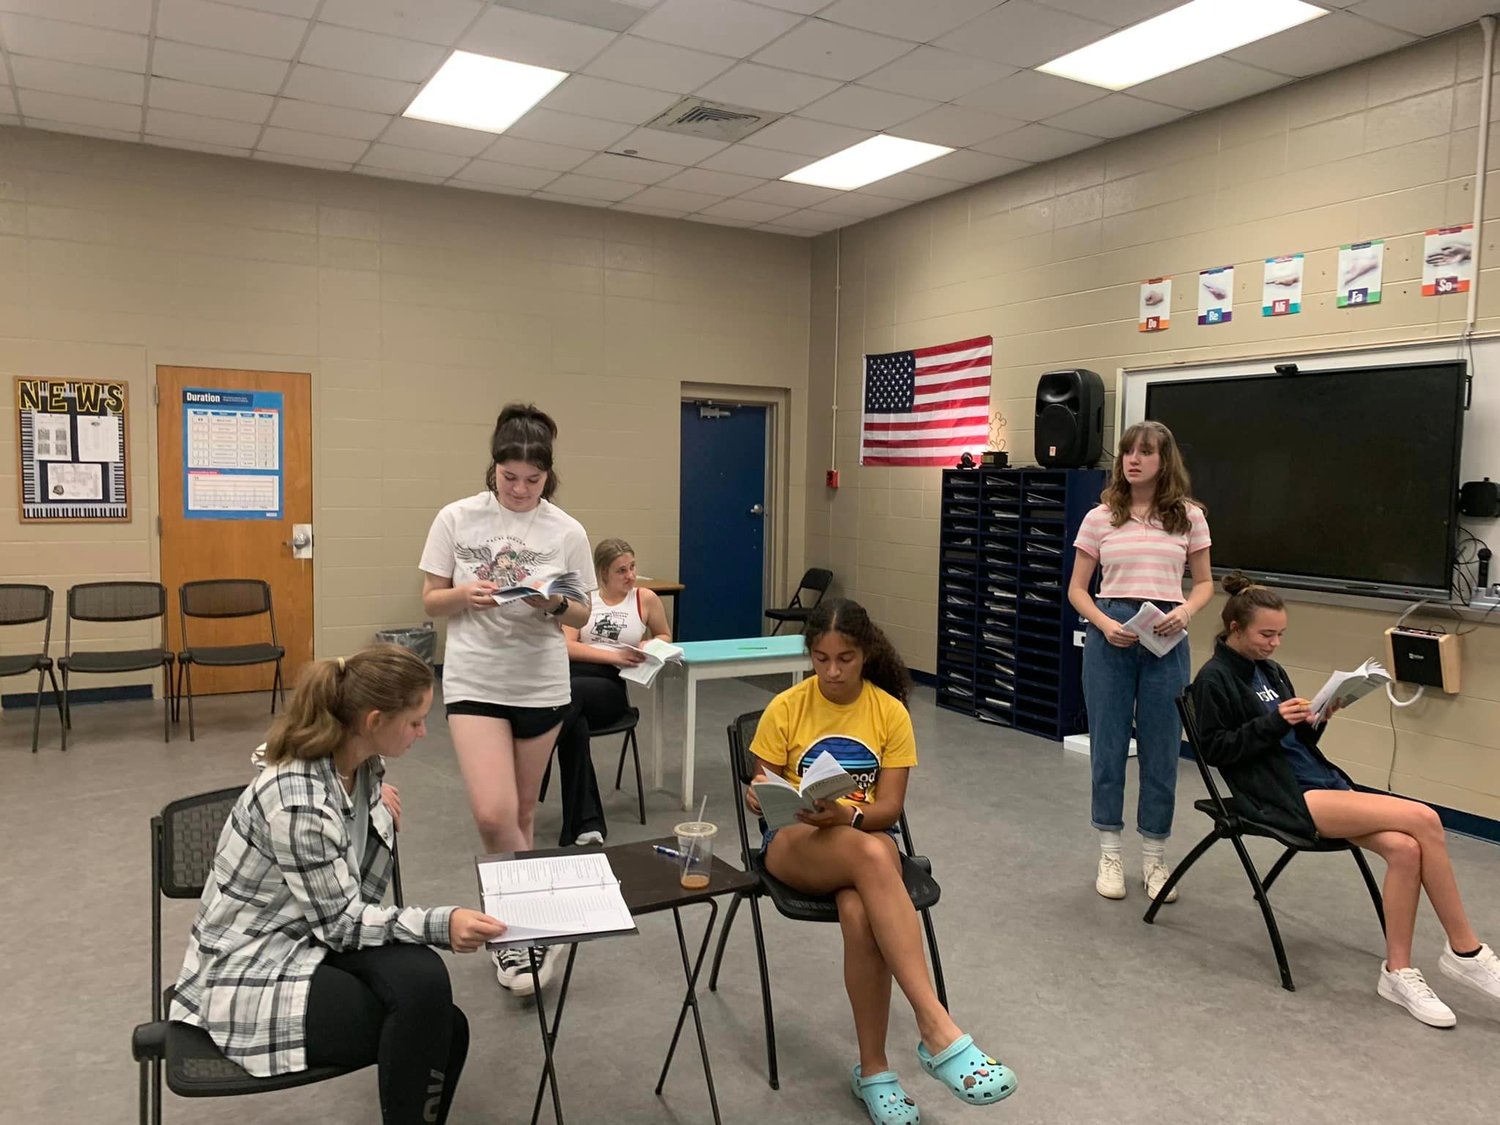 The six stars of Foley High School Theatre Department’s “Steel Magnolias” have spent many hours researching, rehearsing and practicing for their upcoming performances.